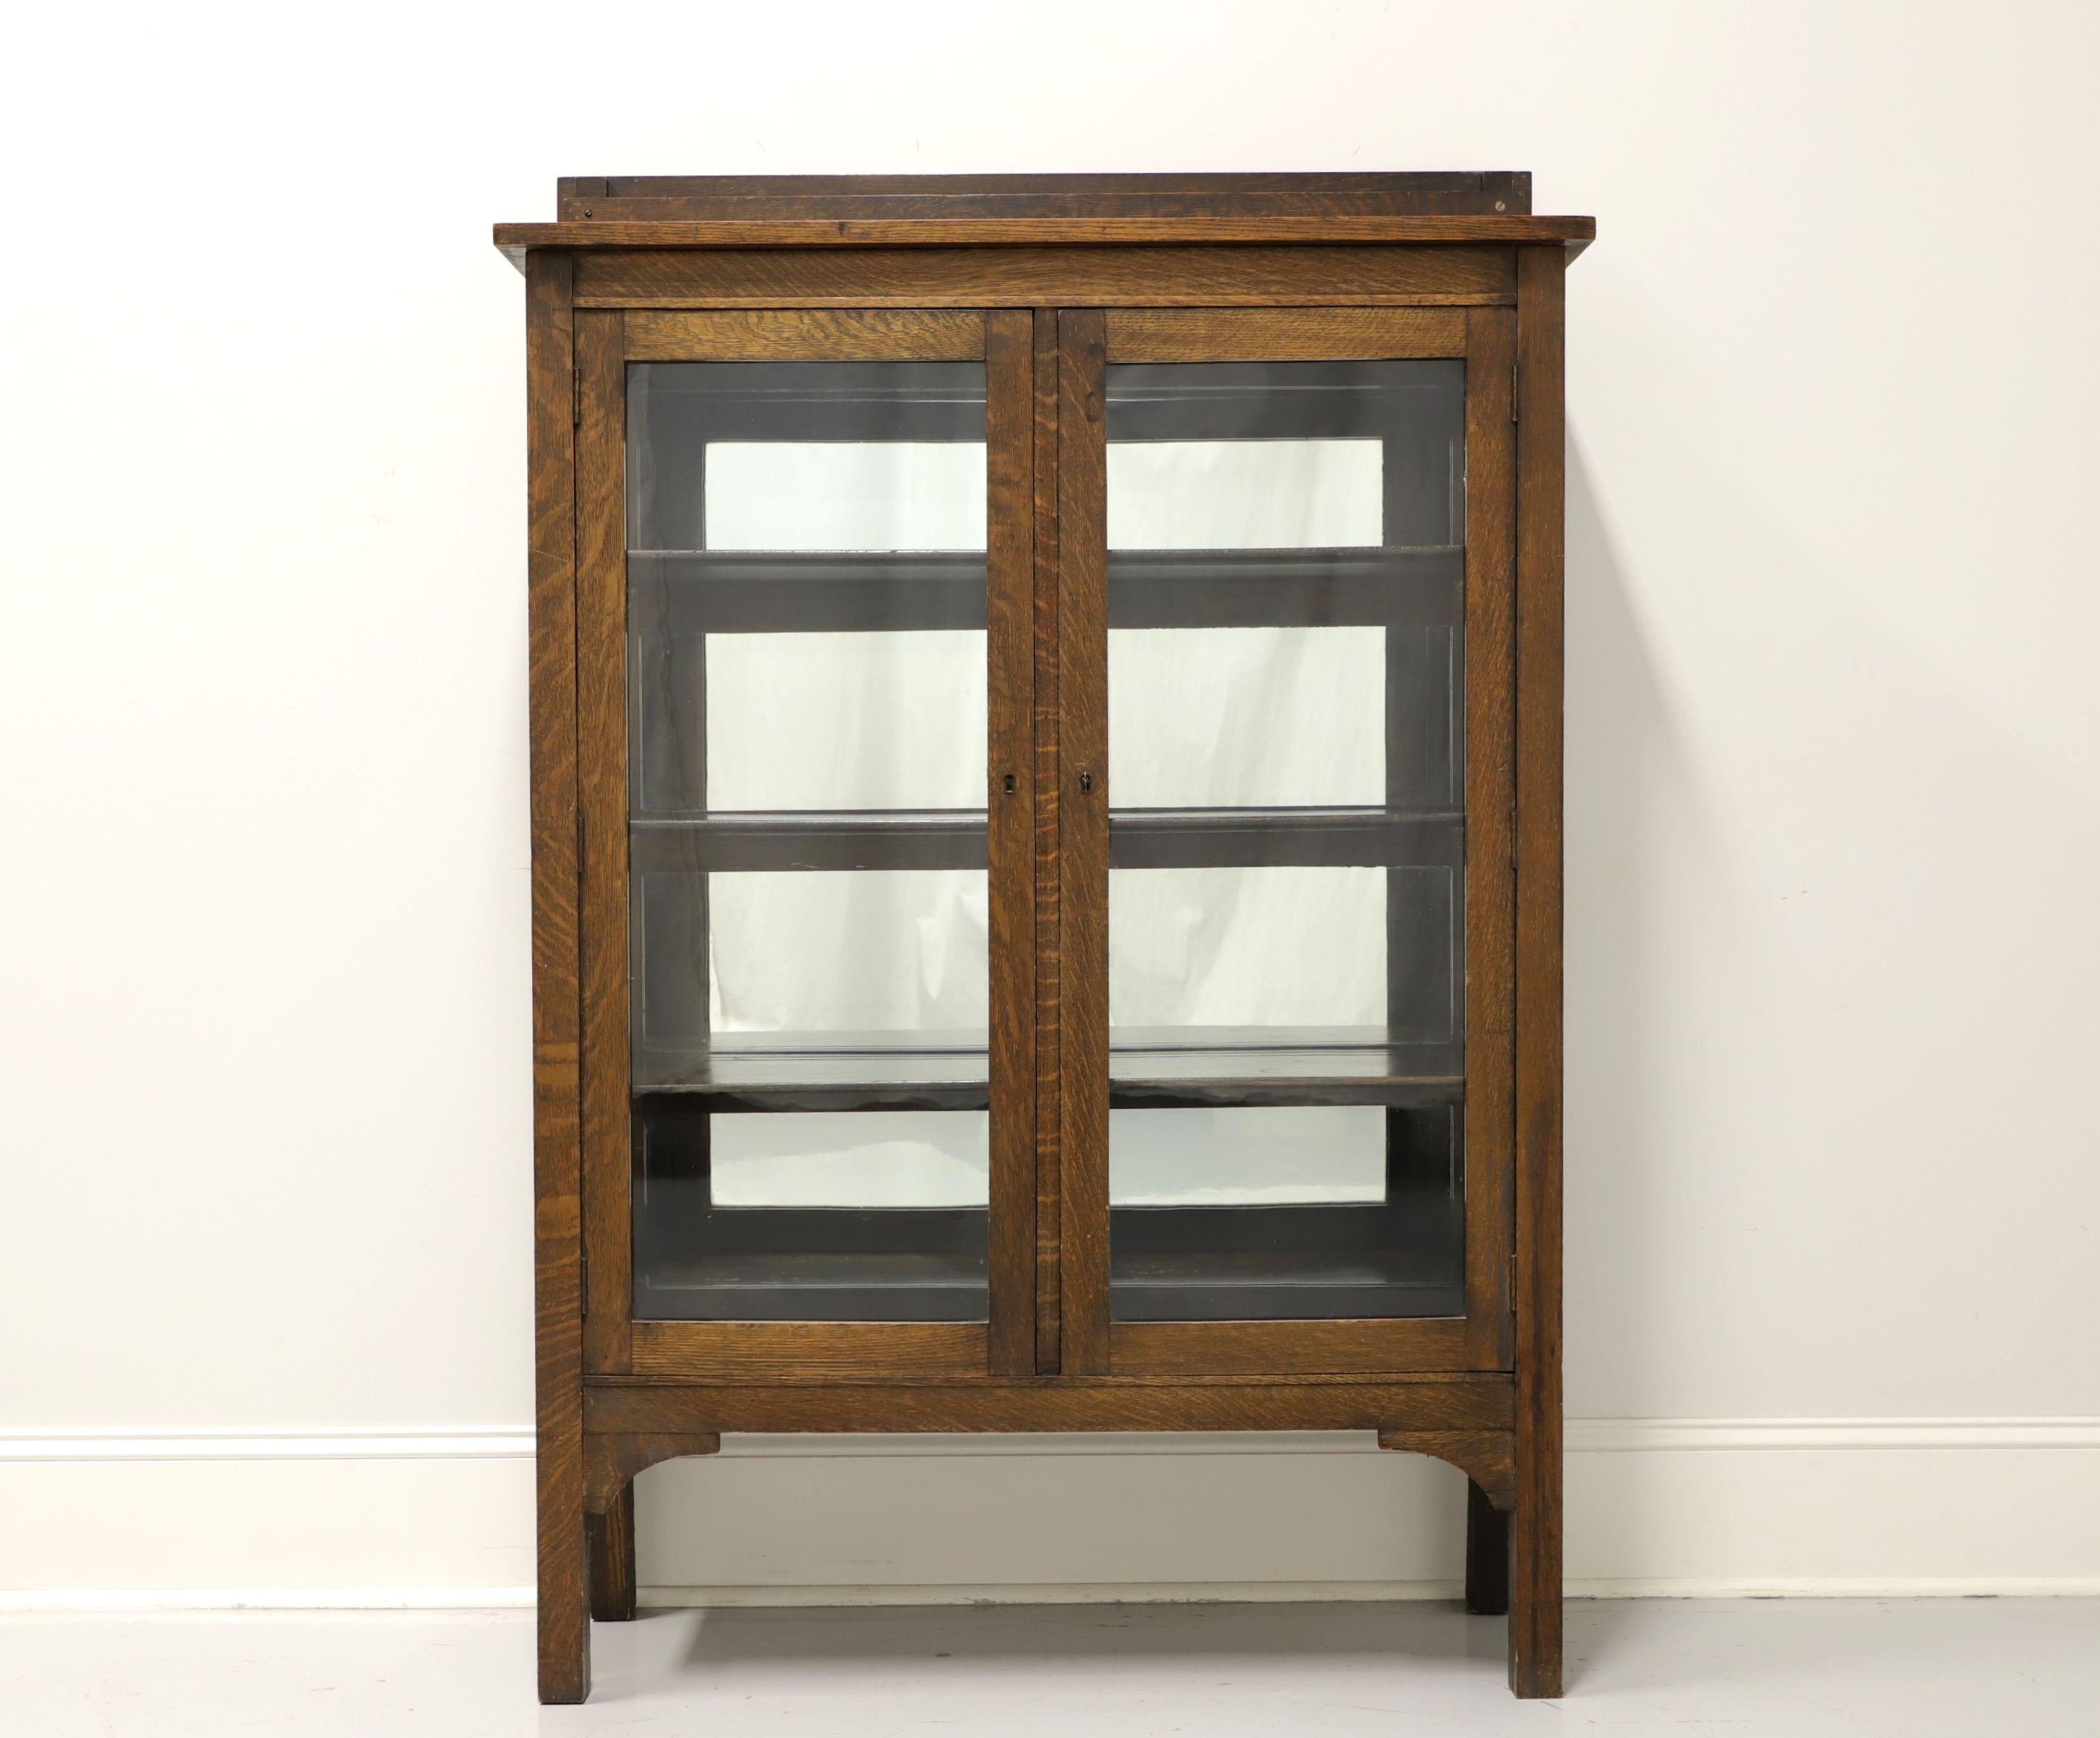 An antique Mission / Arts & Crafts style bookcase cabinet, unbranded. Solid tiger oak with magazine gallery on top, two lockable glass doors, glass side panels and straight legs. Features three adjustable plate grooved shelves. Includes one key.